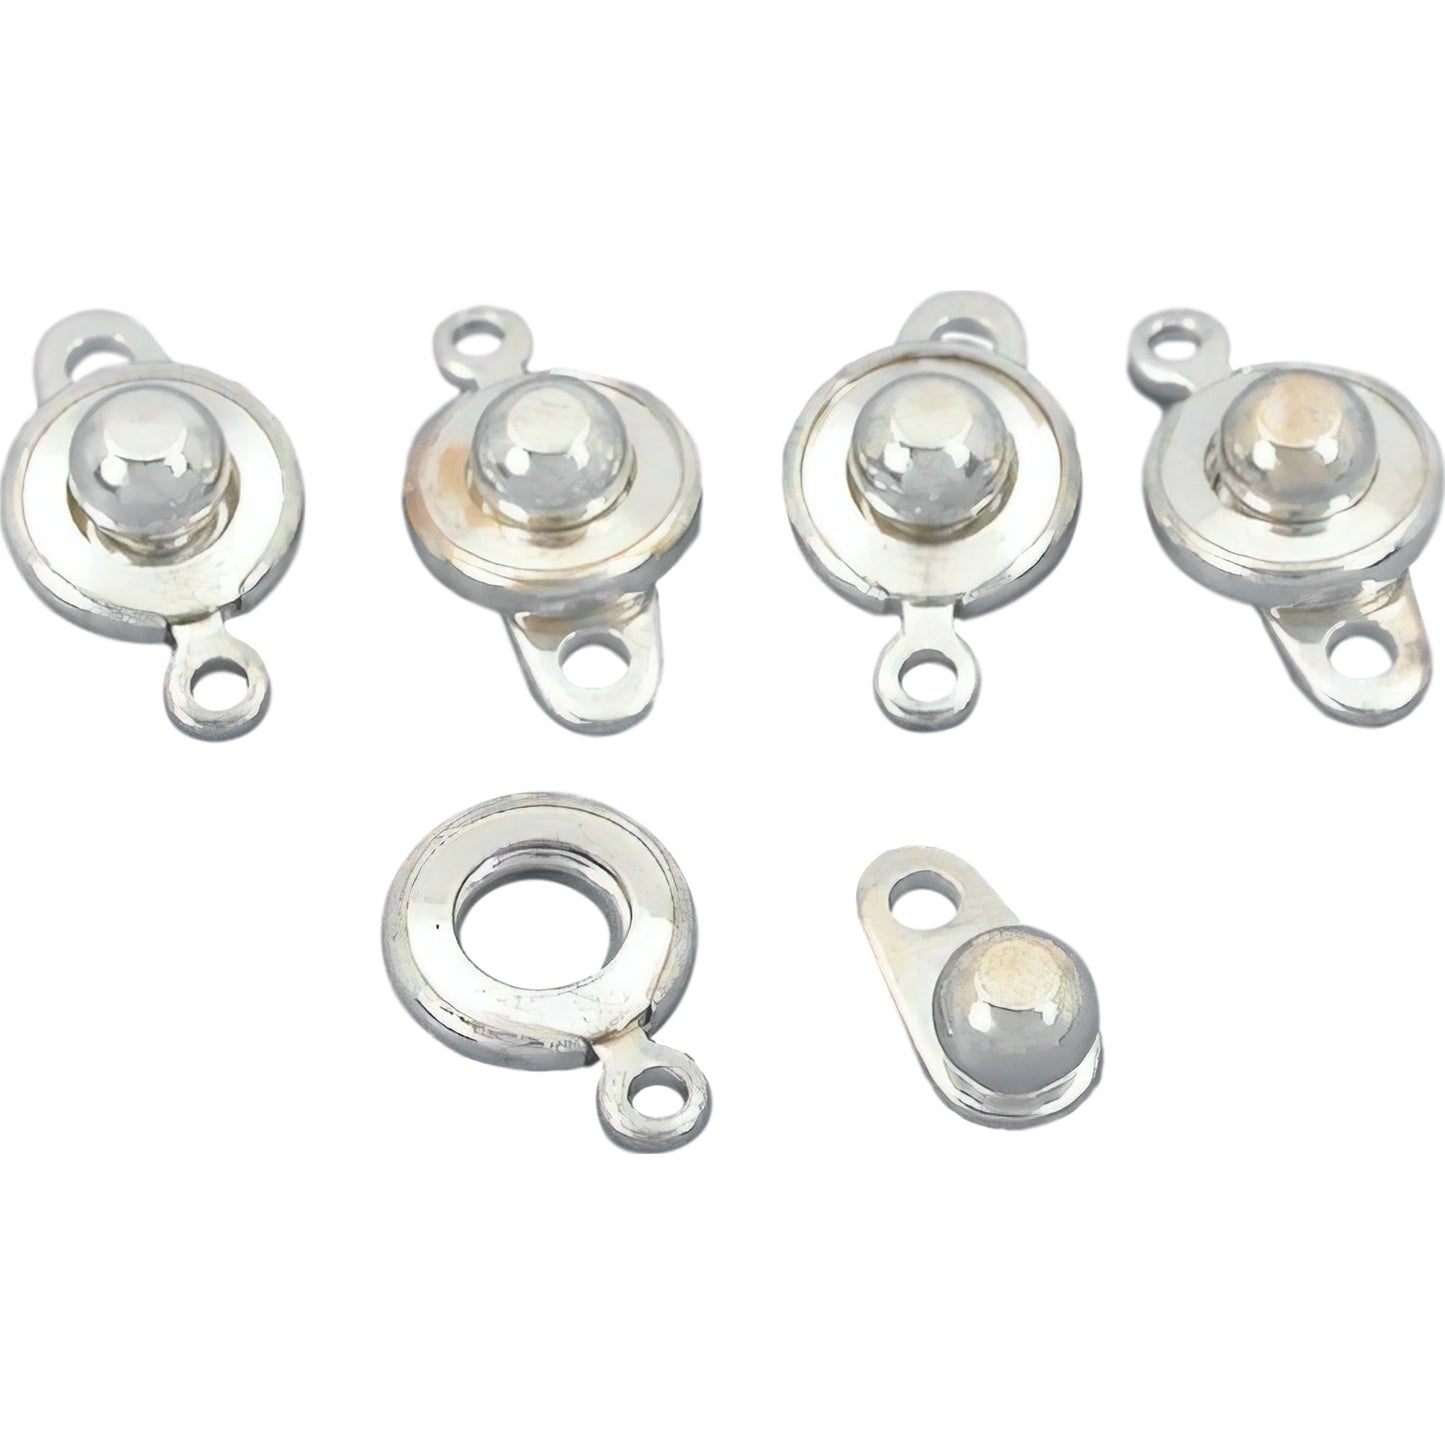 5 Silver Plated Ball & Socket Snap Clasps Jewelry Part